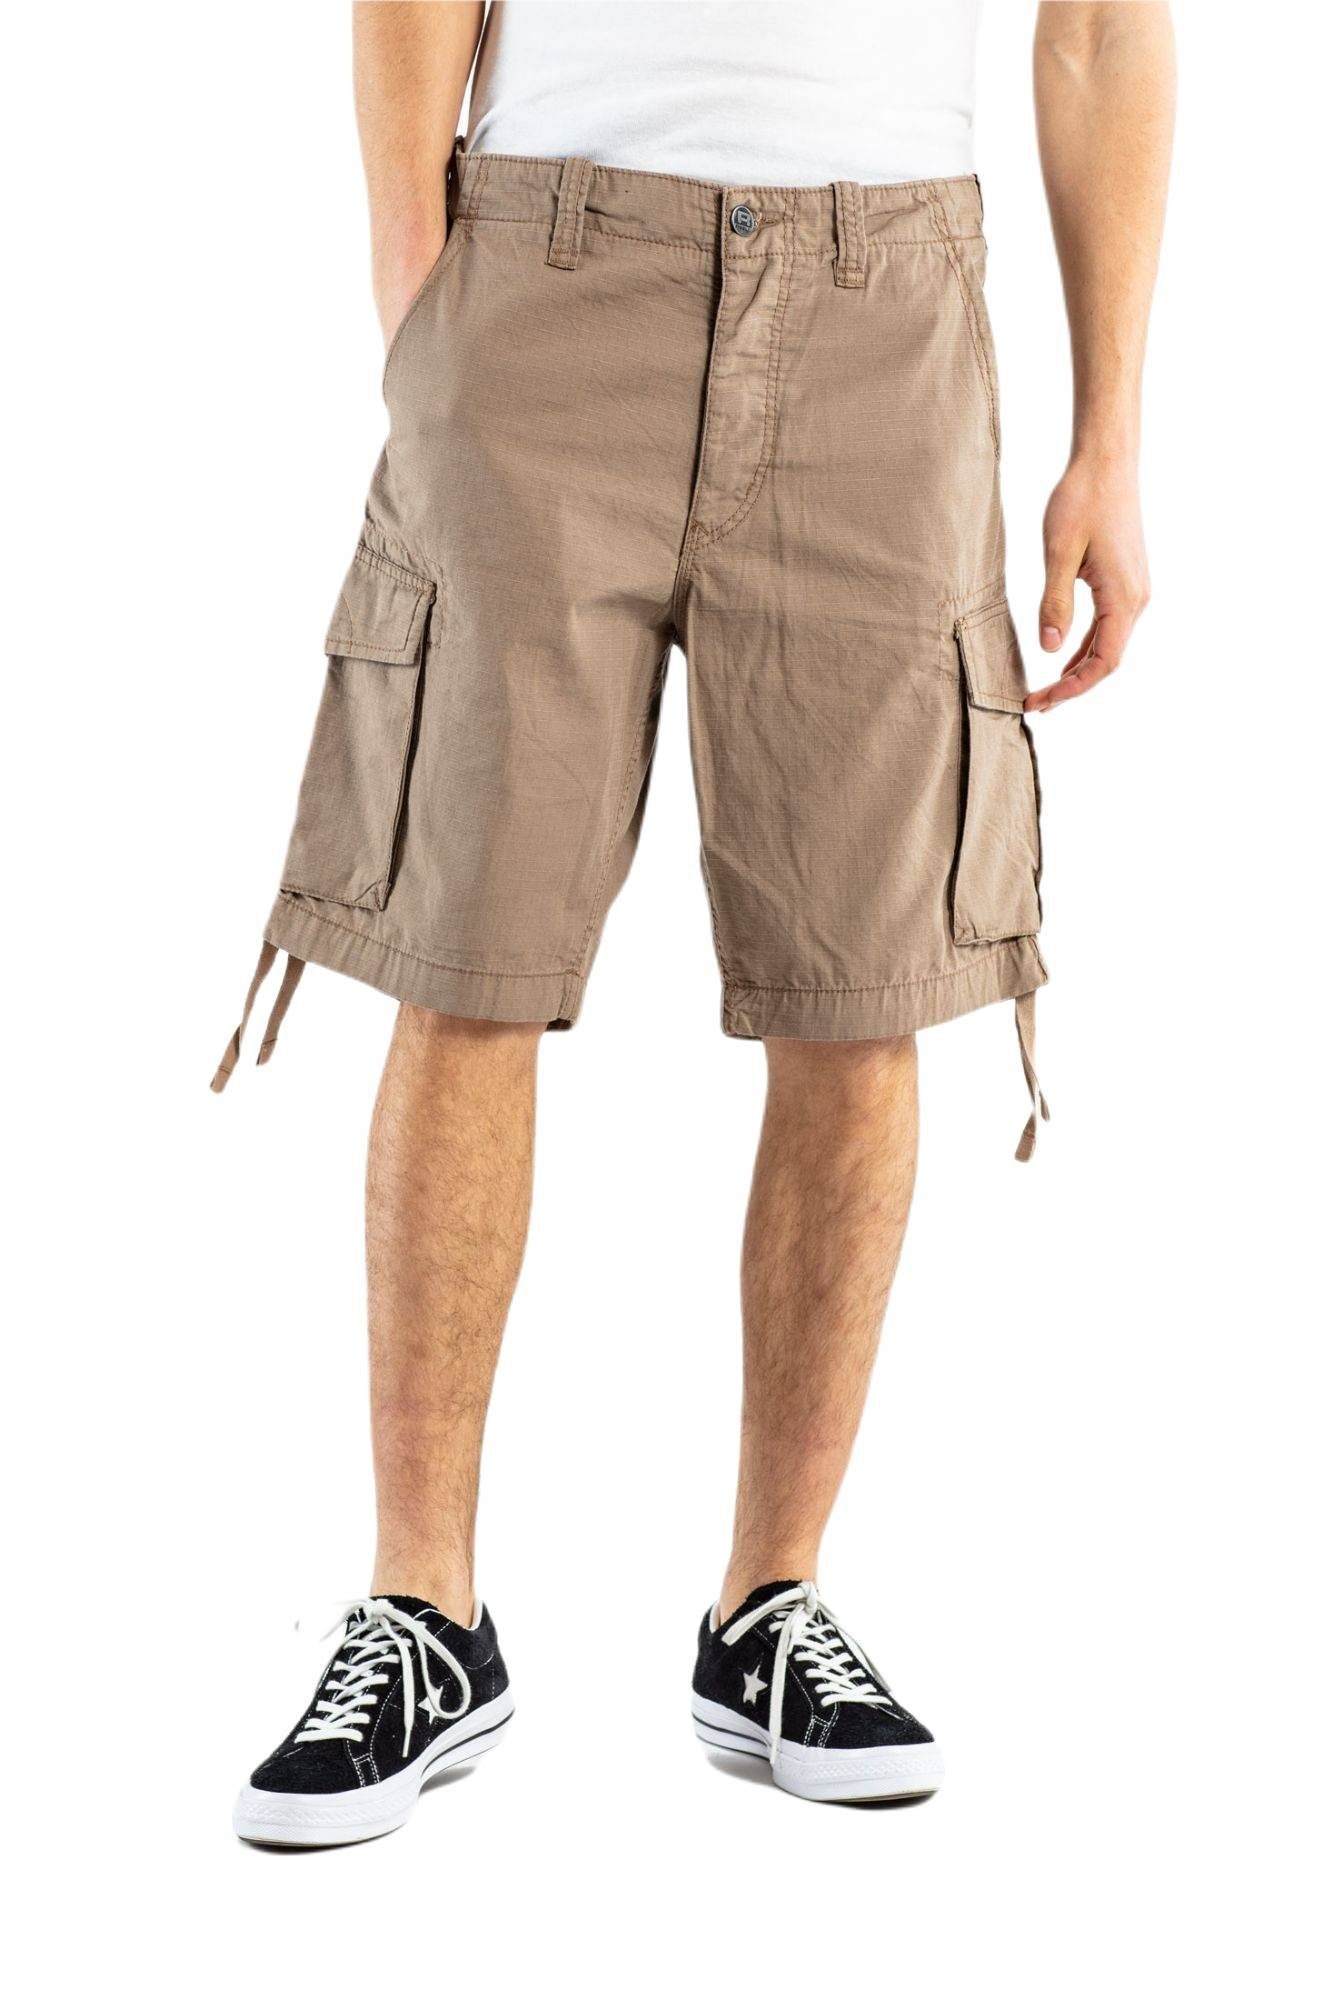 REELL Cargoshorts Short Reell New Cargo, G 40, L 32, F taupe